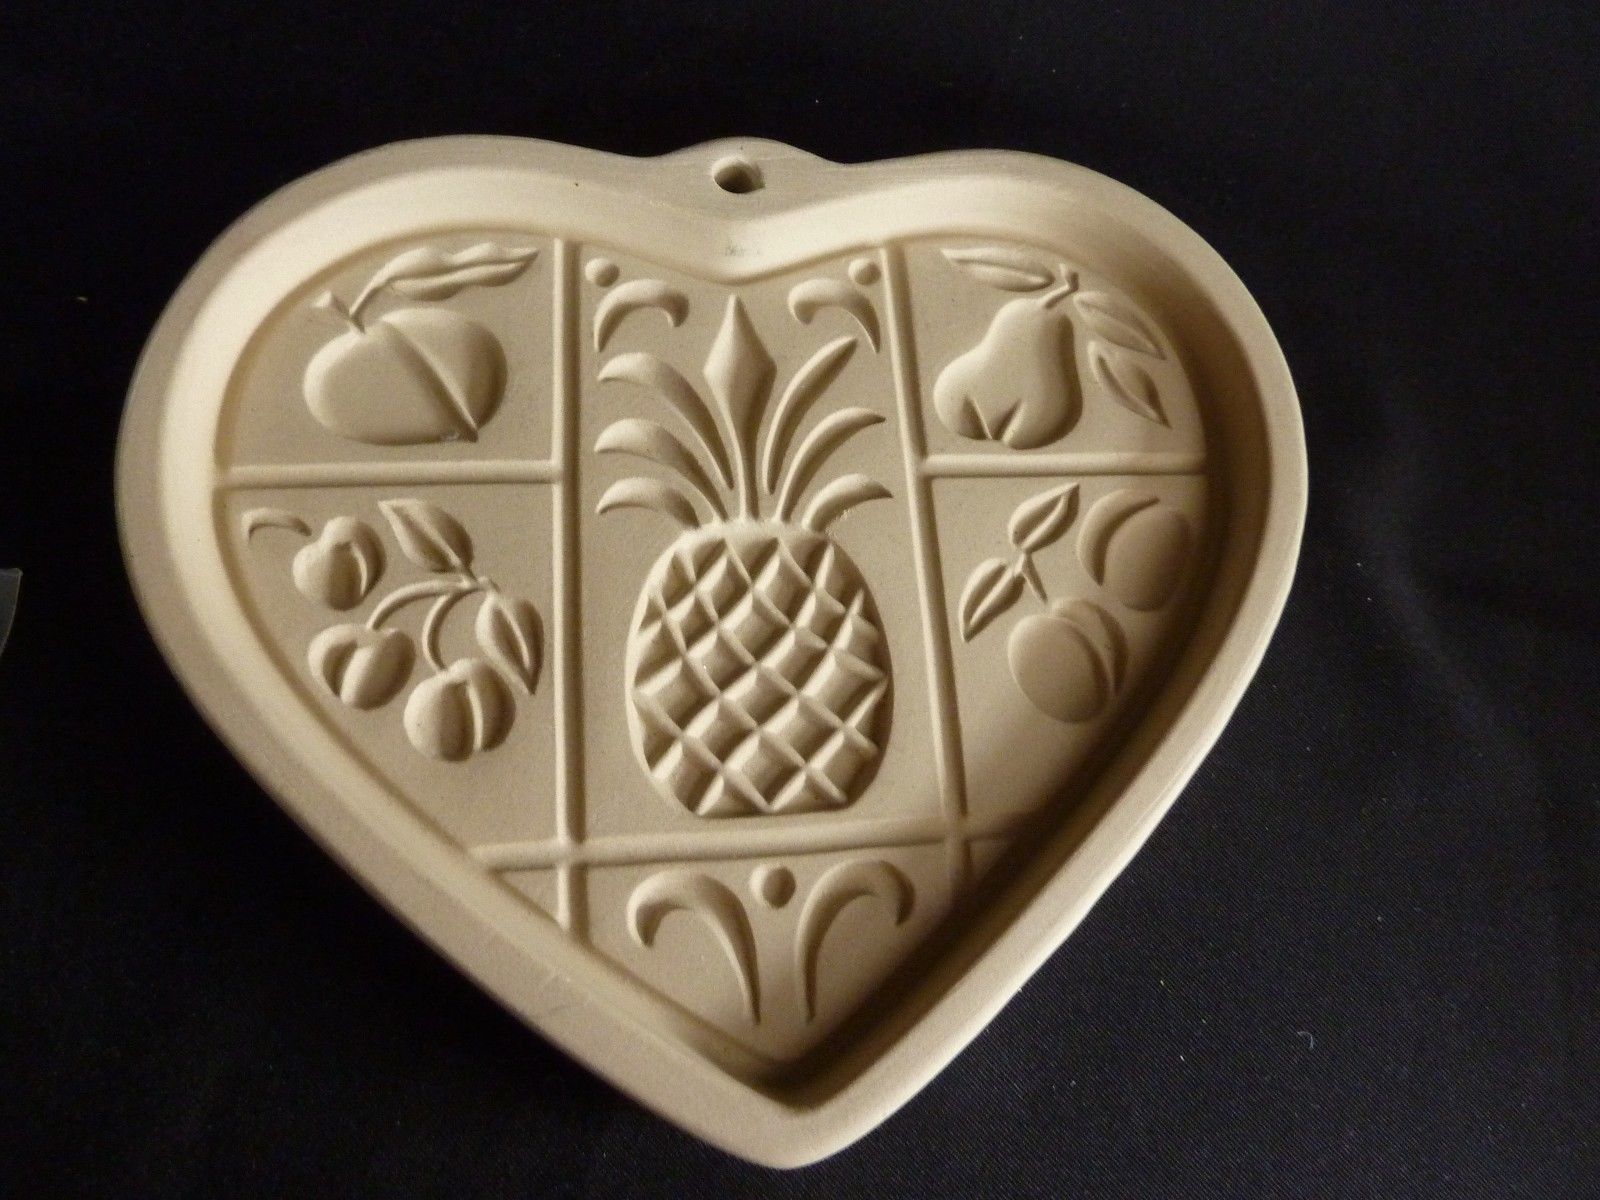 Primary image for THE PAMPERED CHEF Hospitality Heart Cookie Mold  - FAMILY HERITAGE STONEWARE